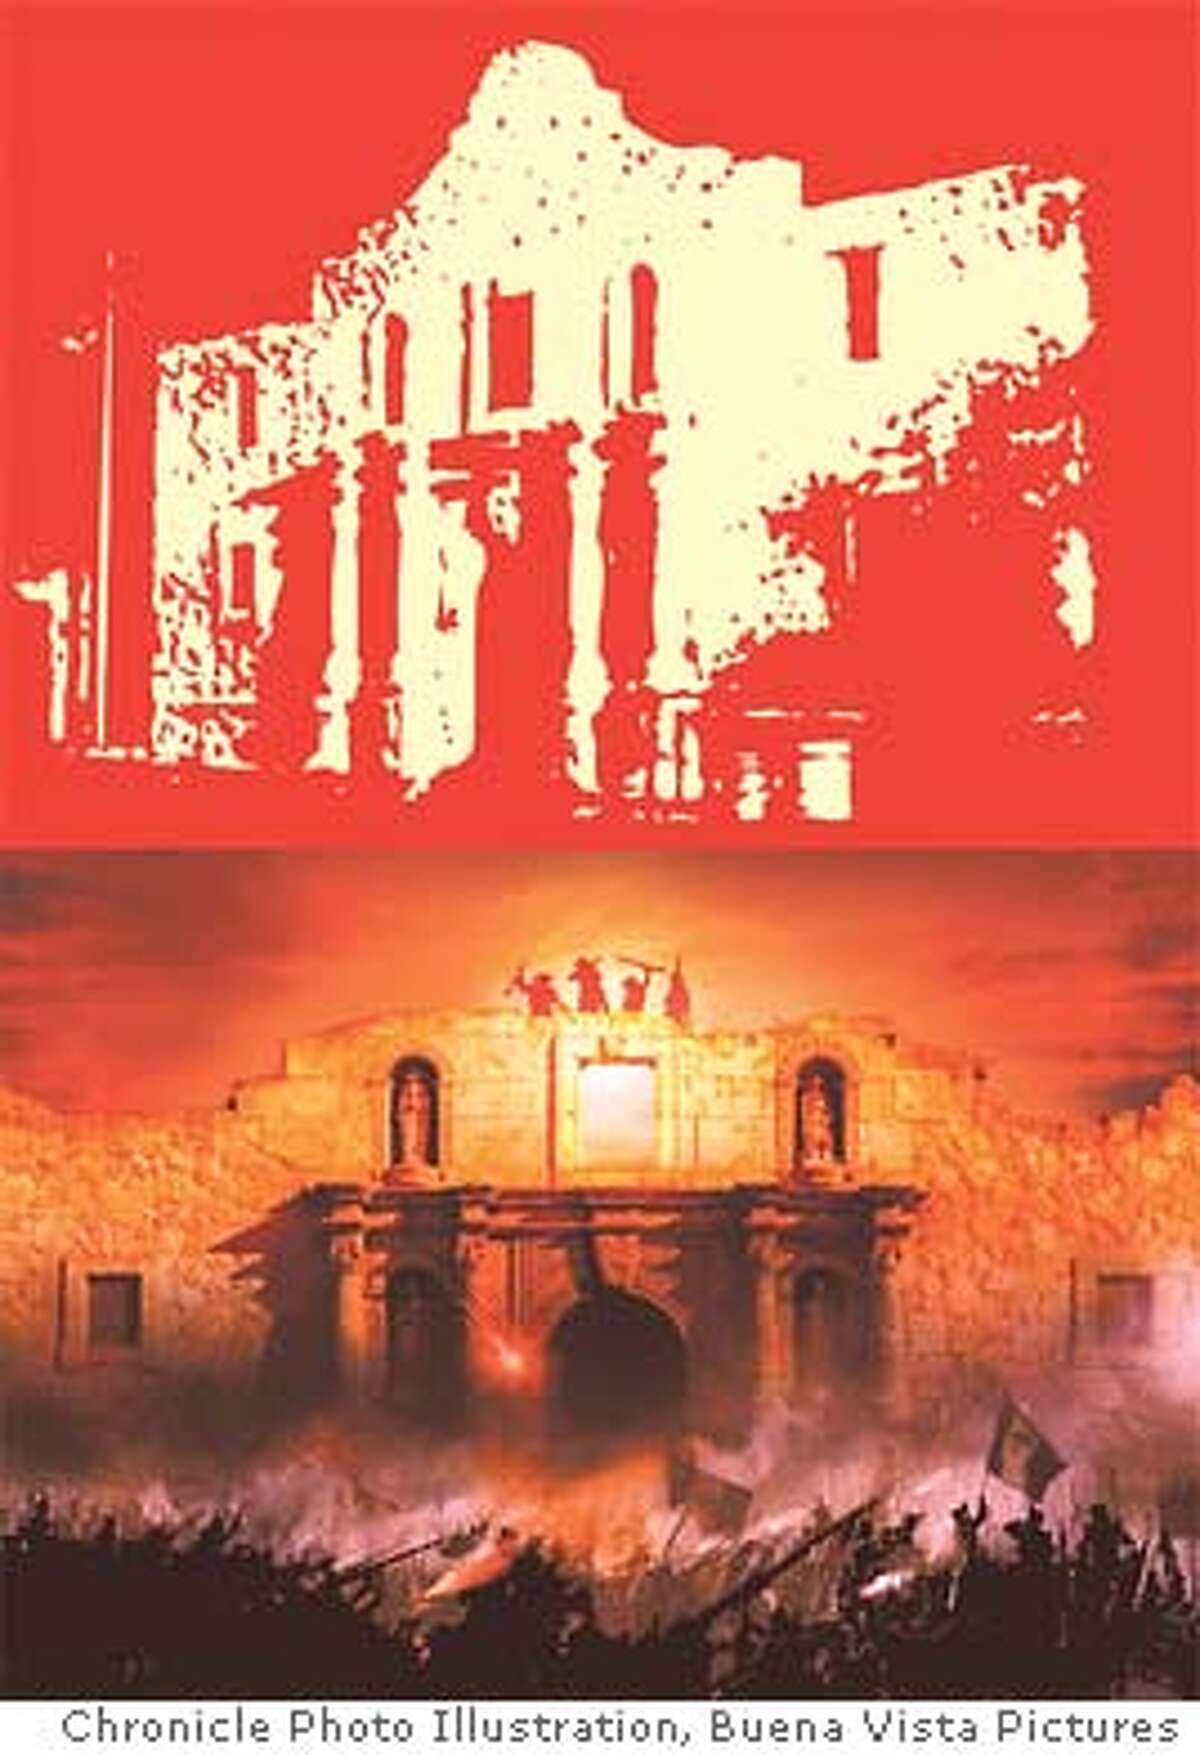 Remember the Alamo, sure, as long as we remember it for what it really